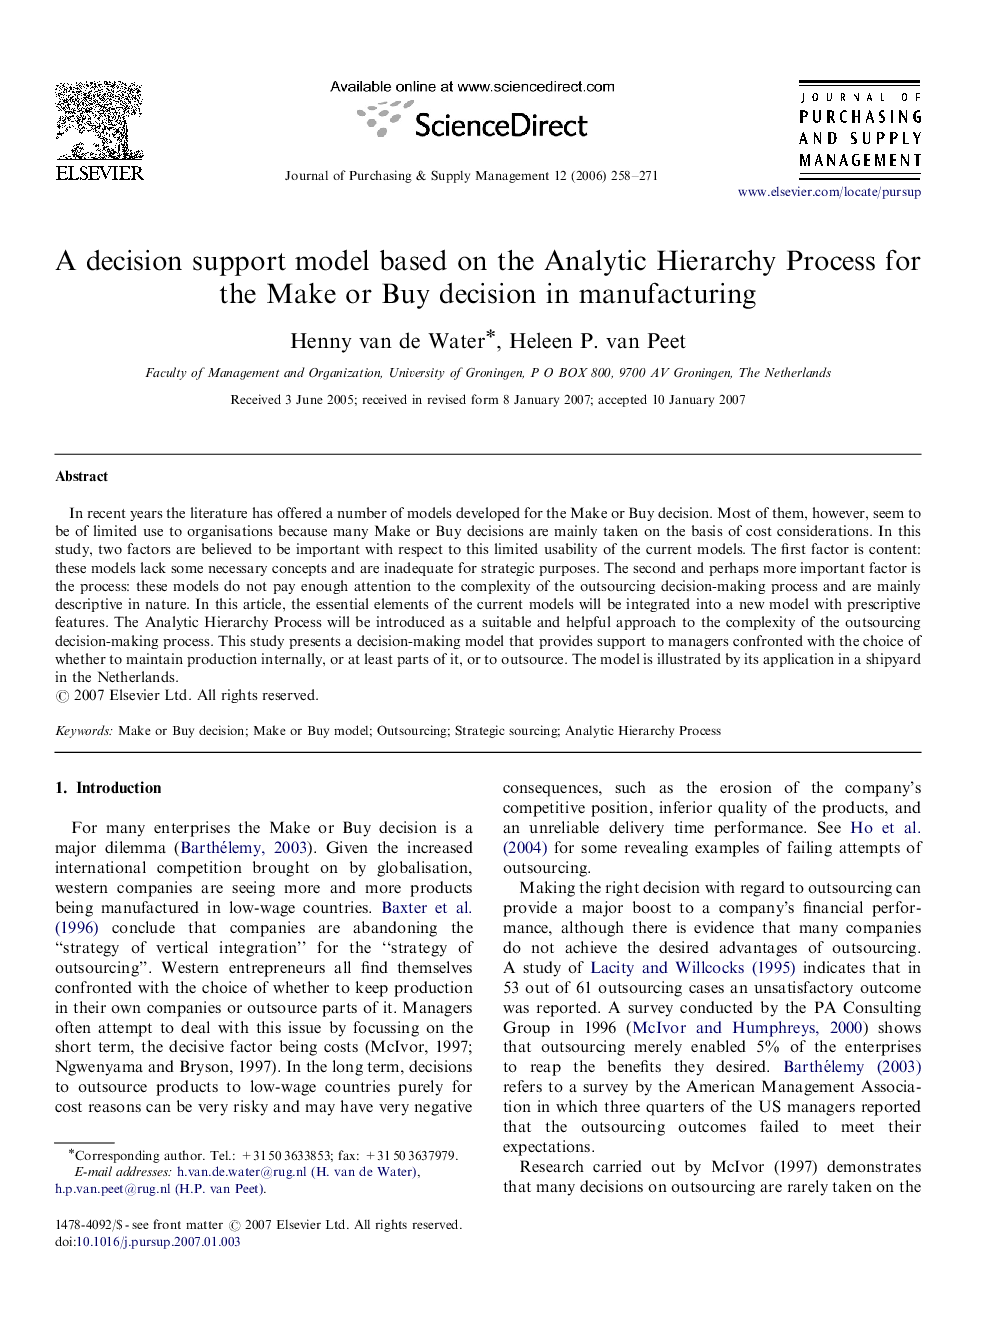 A decision support model based on the Analytic Hierarchy Process for the Make or Buy decision in manufacturing